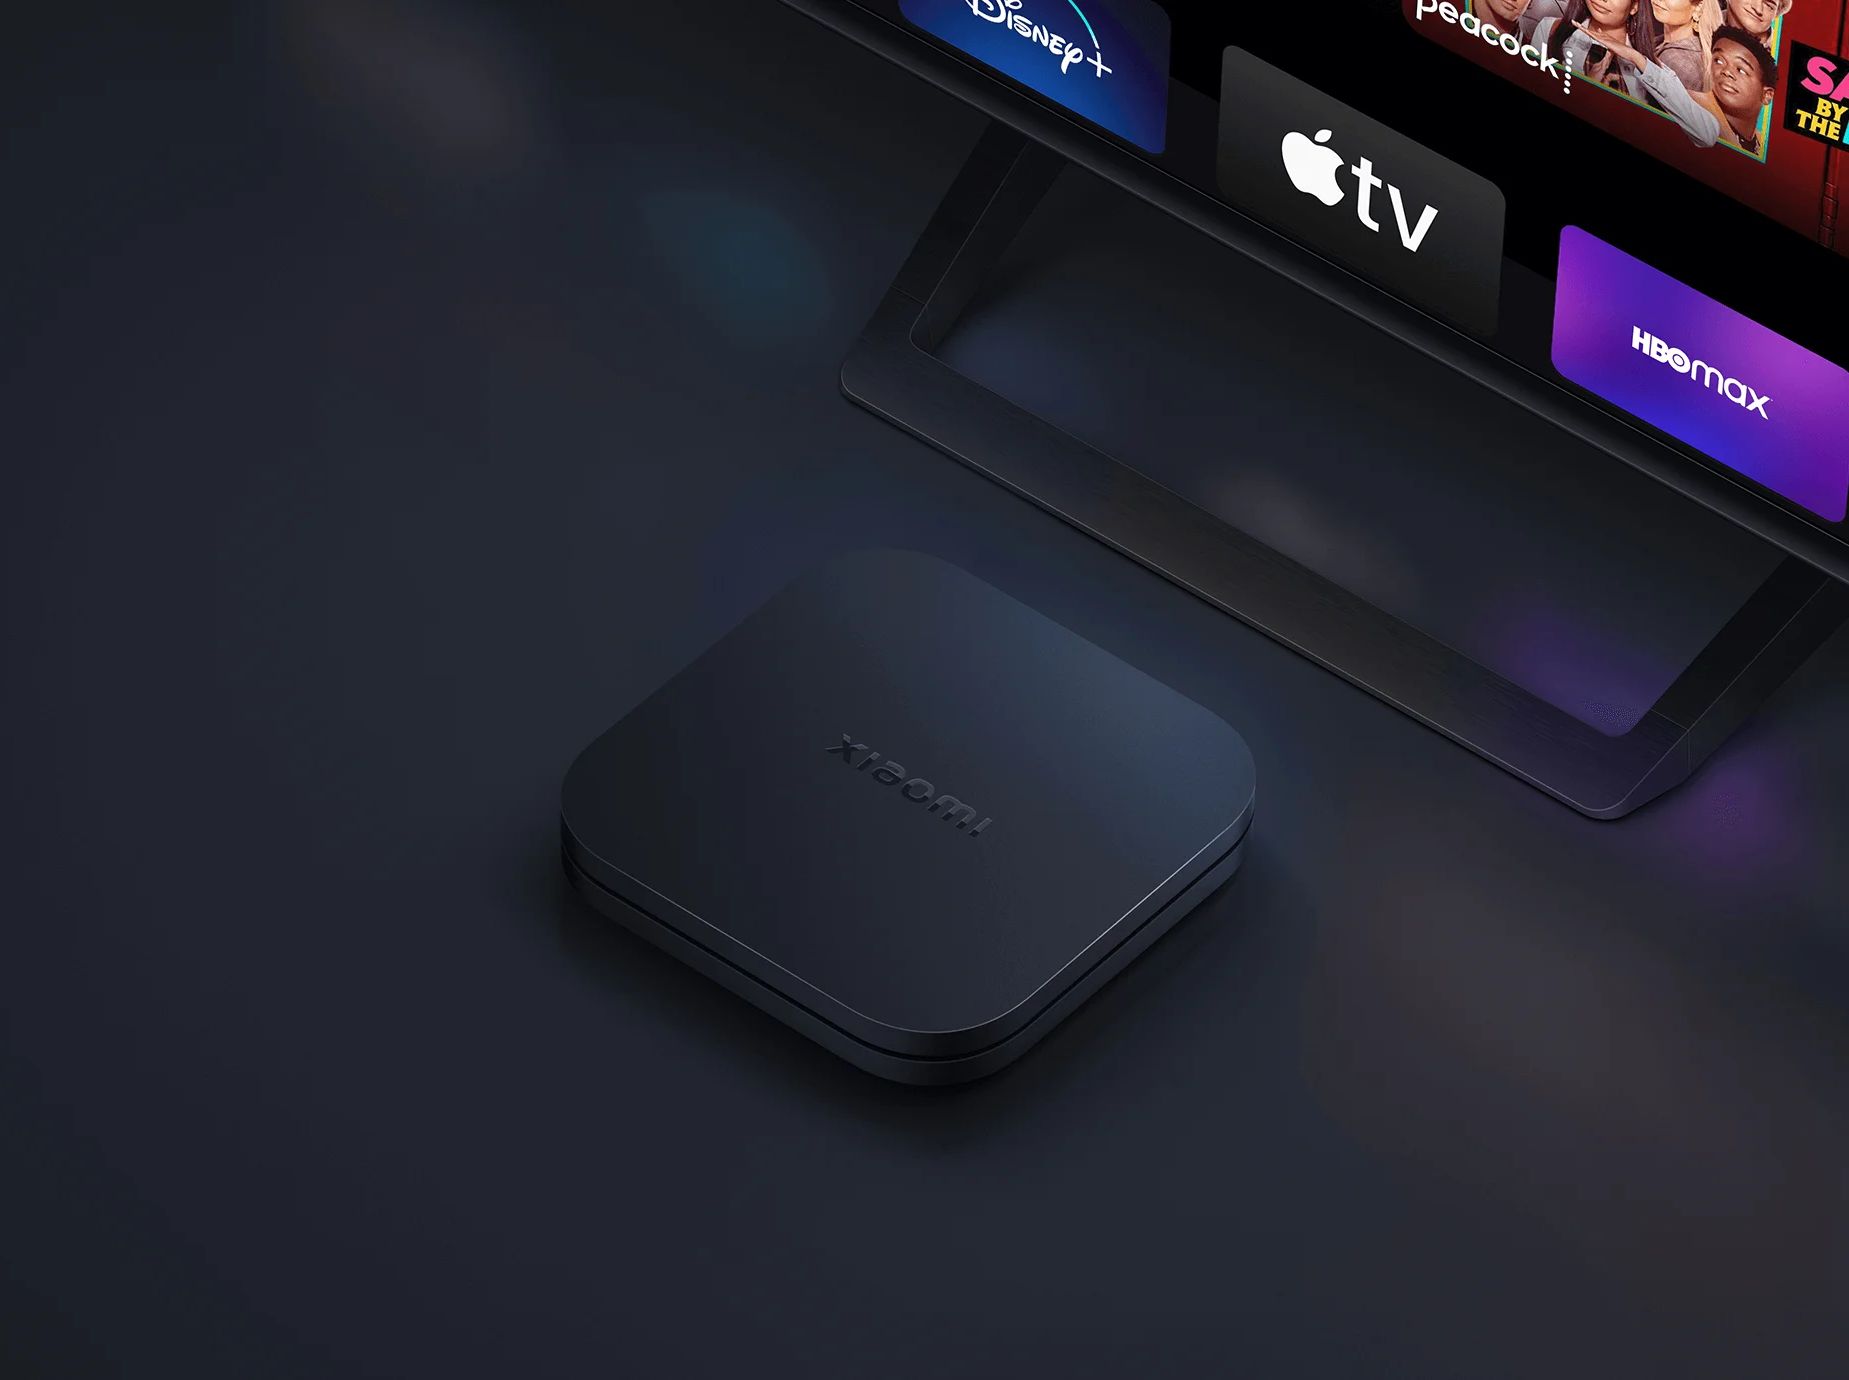 Xiaomi's next 4K-enabled set-top box will run Google TV instead of Android  TV